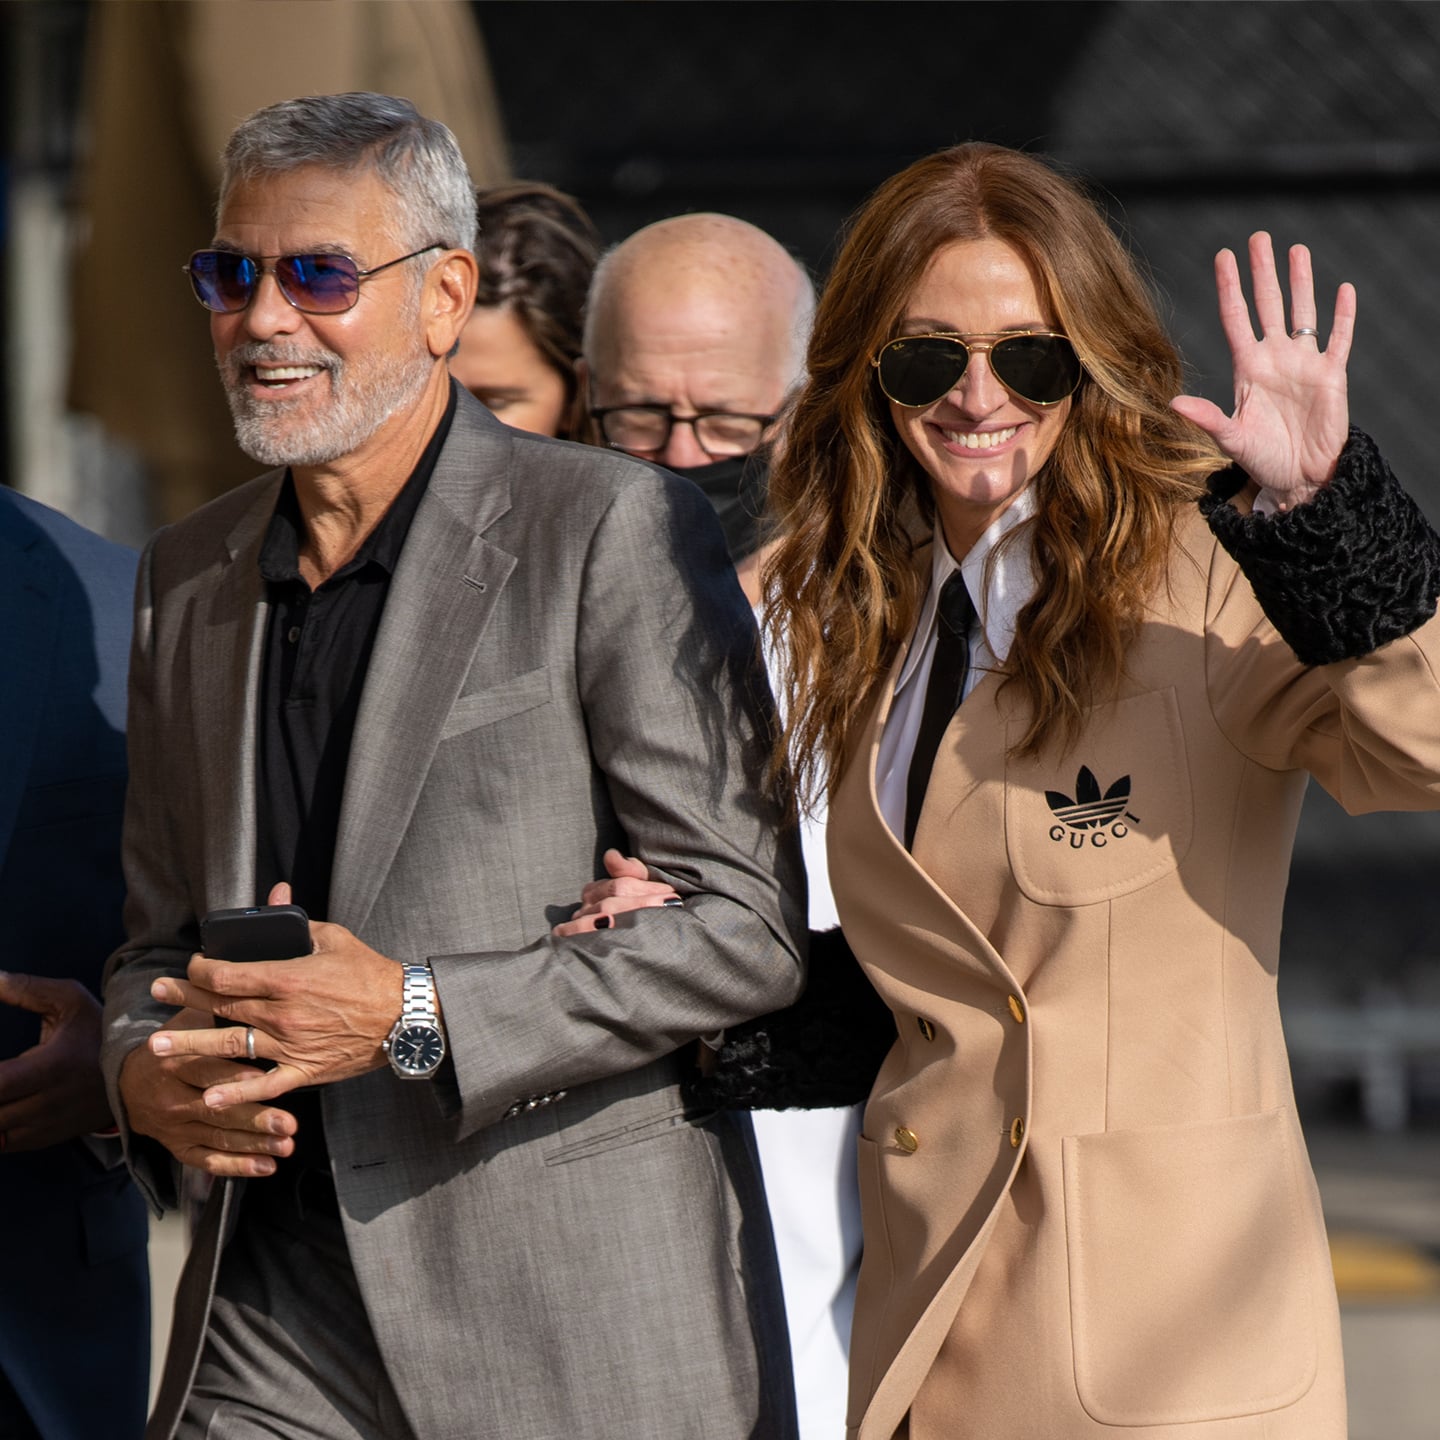 Pech dialect behang Julia Roberts, George Clooney Match in Suits on Press Tour | POPSUGAR  Fashion